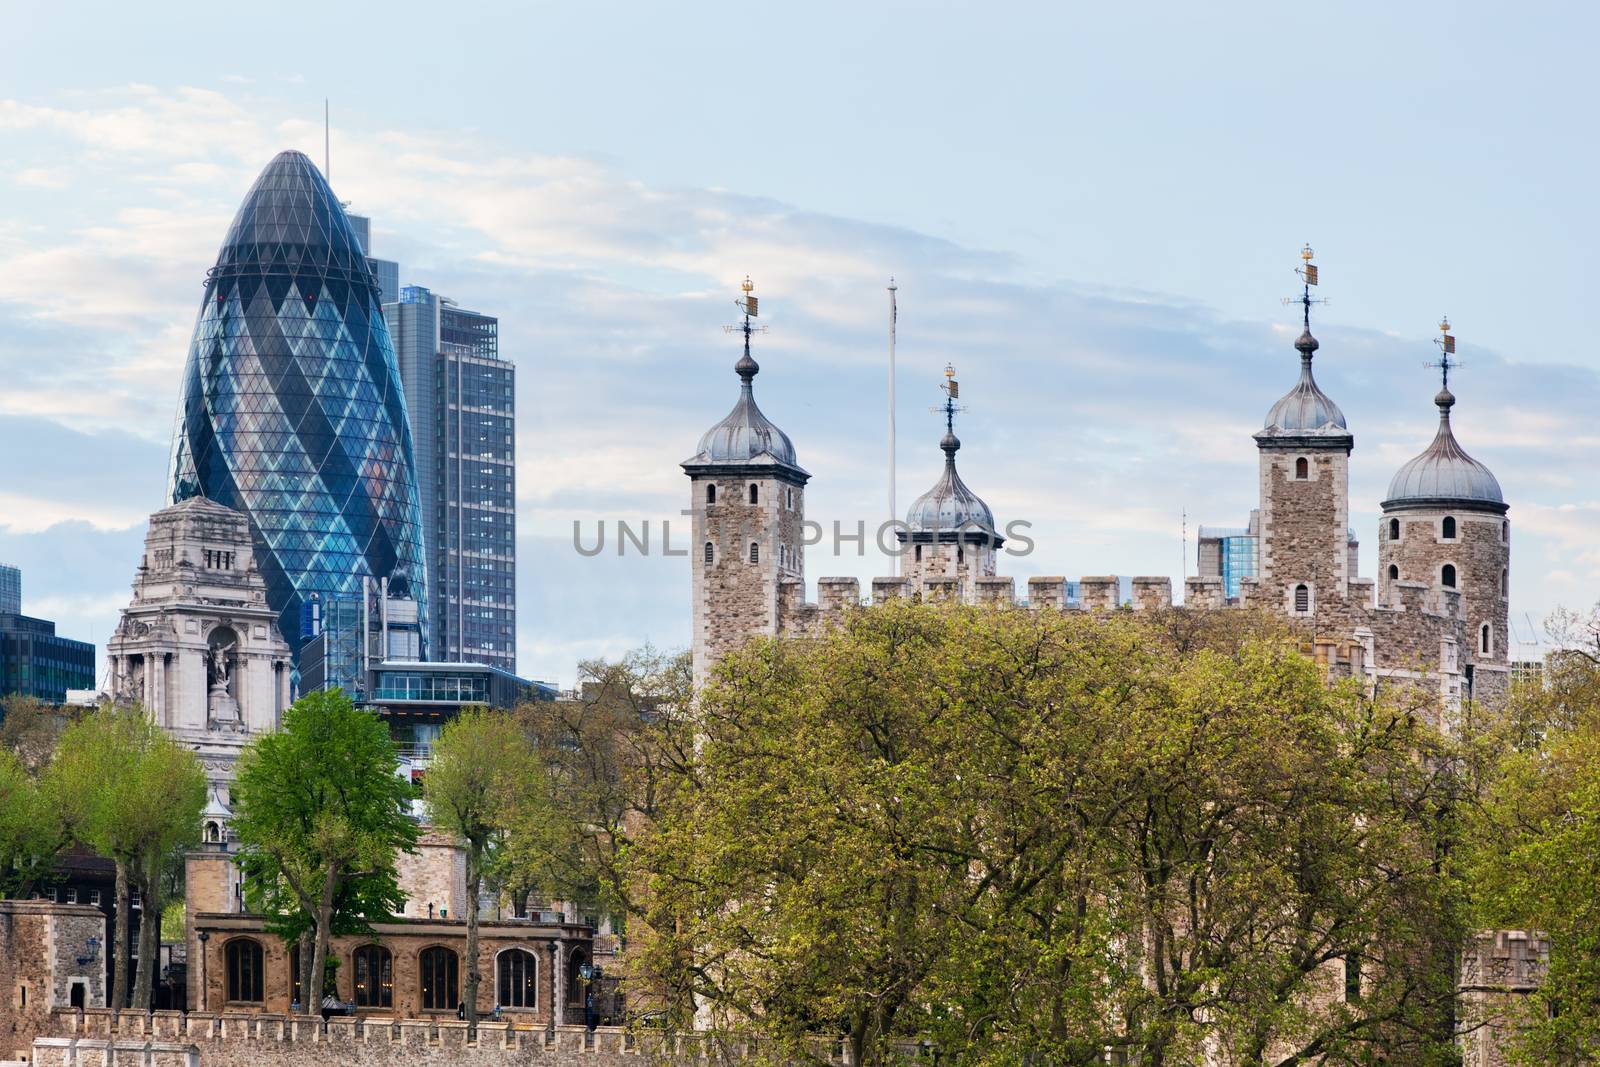 The Tower of London and the 30 St Mary Axe skyscraper aka the Gherkin, England, the UK. The historic Royal Palace and Fortress next to the financial district